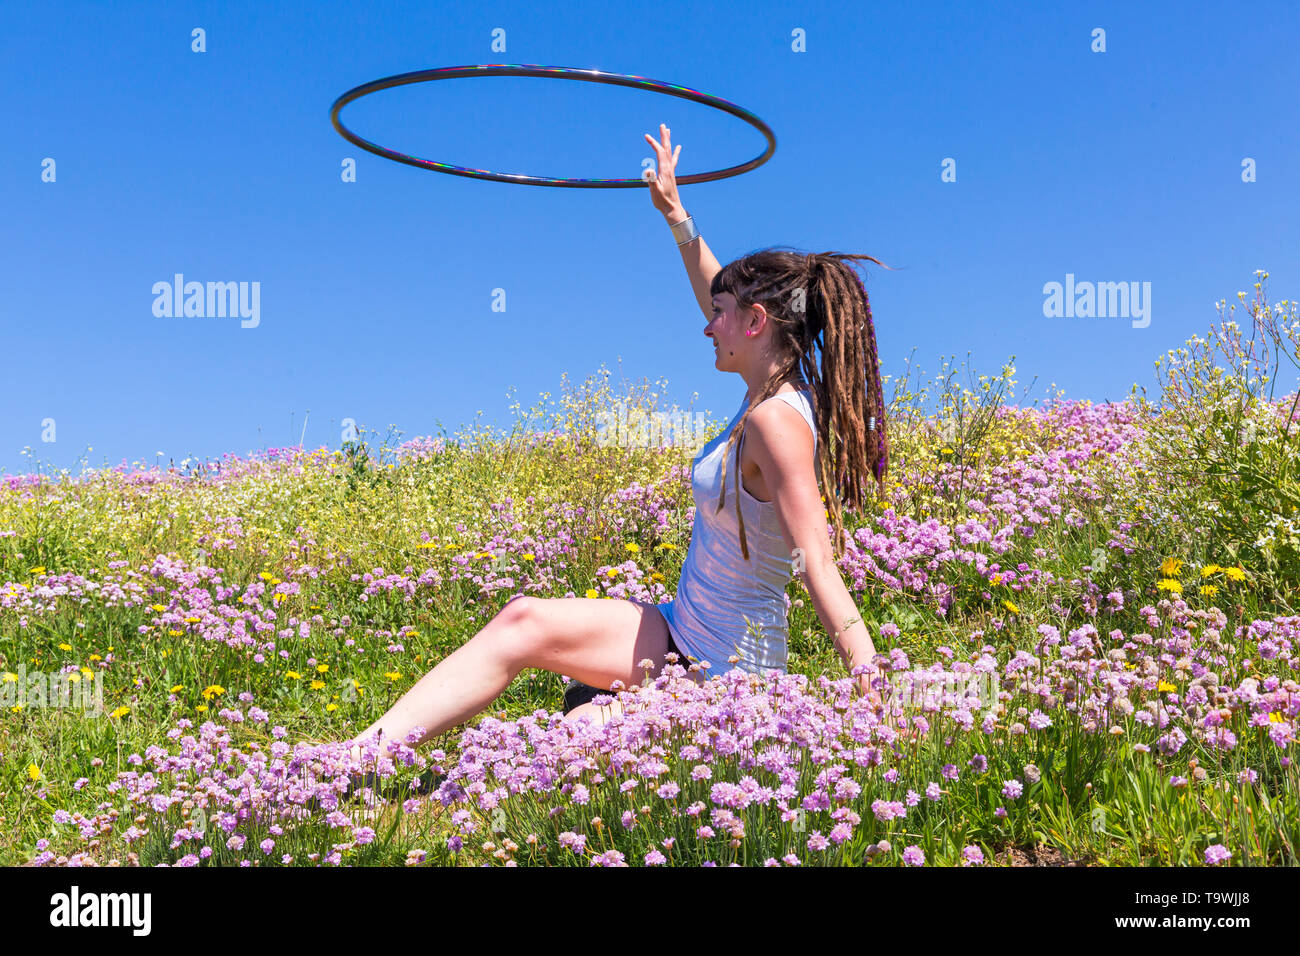 Southbourne, Bournemouth, Dorset, UK. 21st May, 2019. UK weather: lovely warm sunny morning as Lottie Lucid performs her hula hooping routine on the seafront cliffs at Southbourne among the wildflowers, Sea Thrift, Armeria maritime, enjoying the warm sunny weather in her mini dress. Credit: Carolyn Jenkins/Alamy Live News Stock Photo